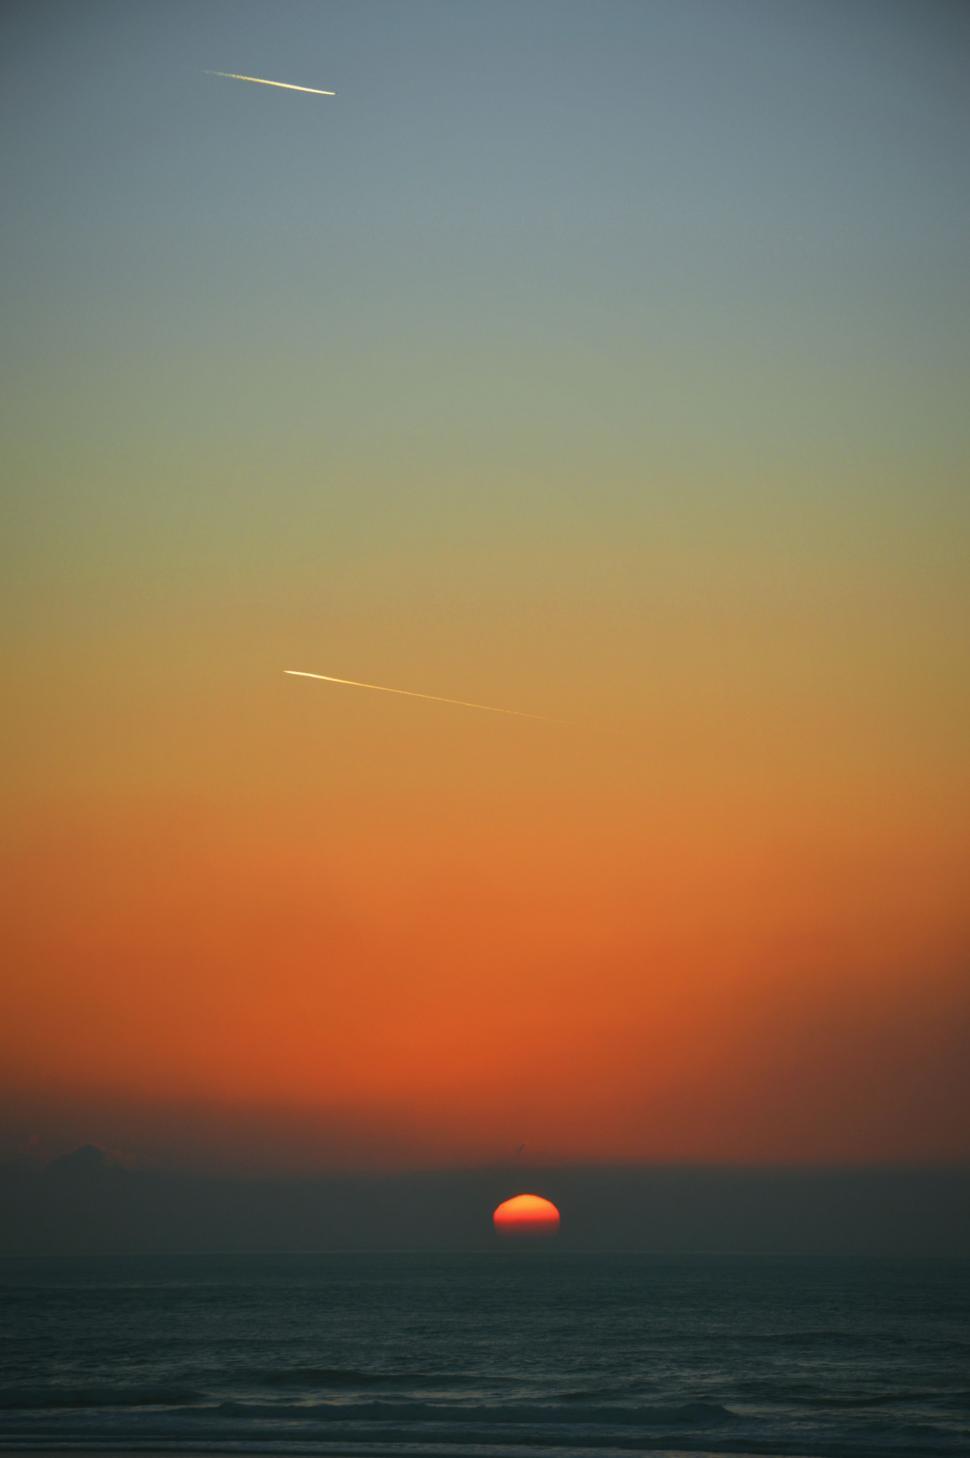 Free Image of Sun Setting Over Ocean With Plane in Sky 